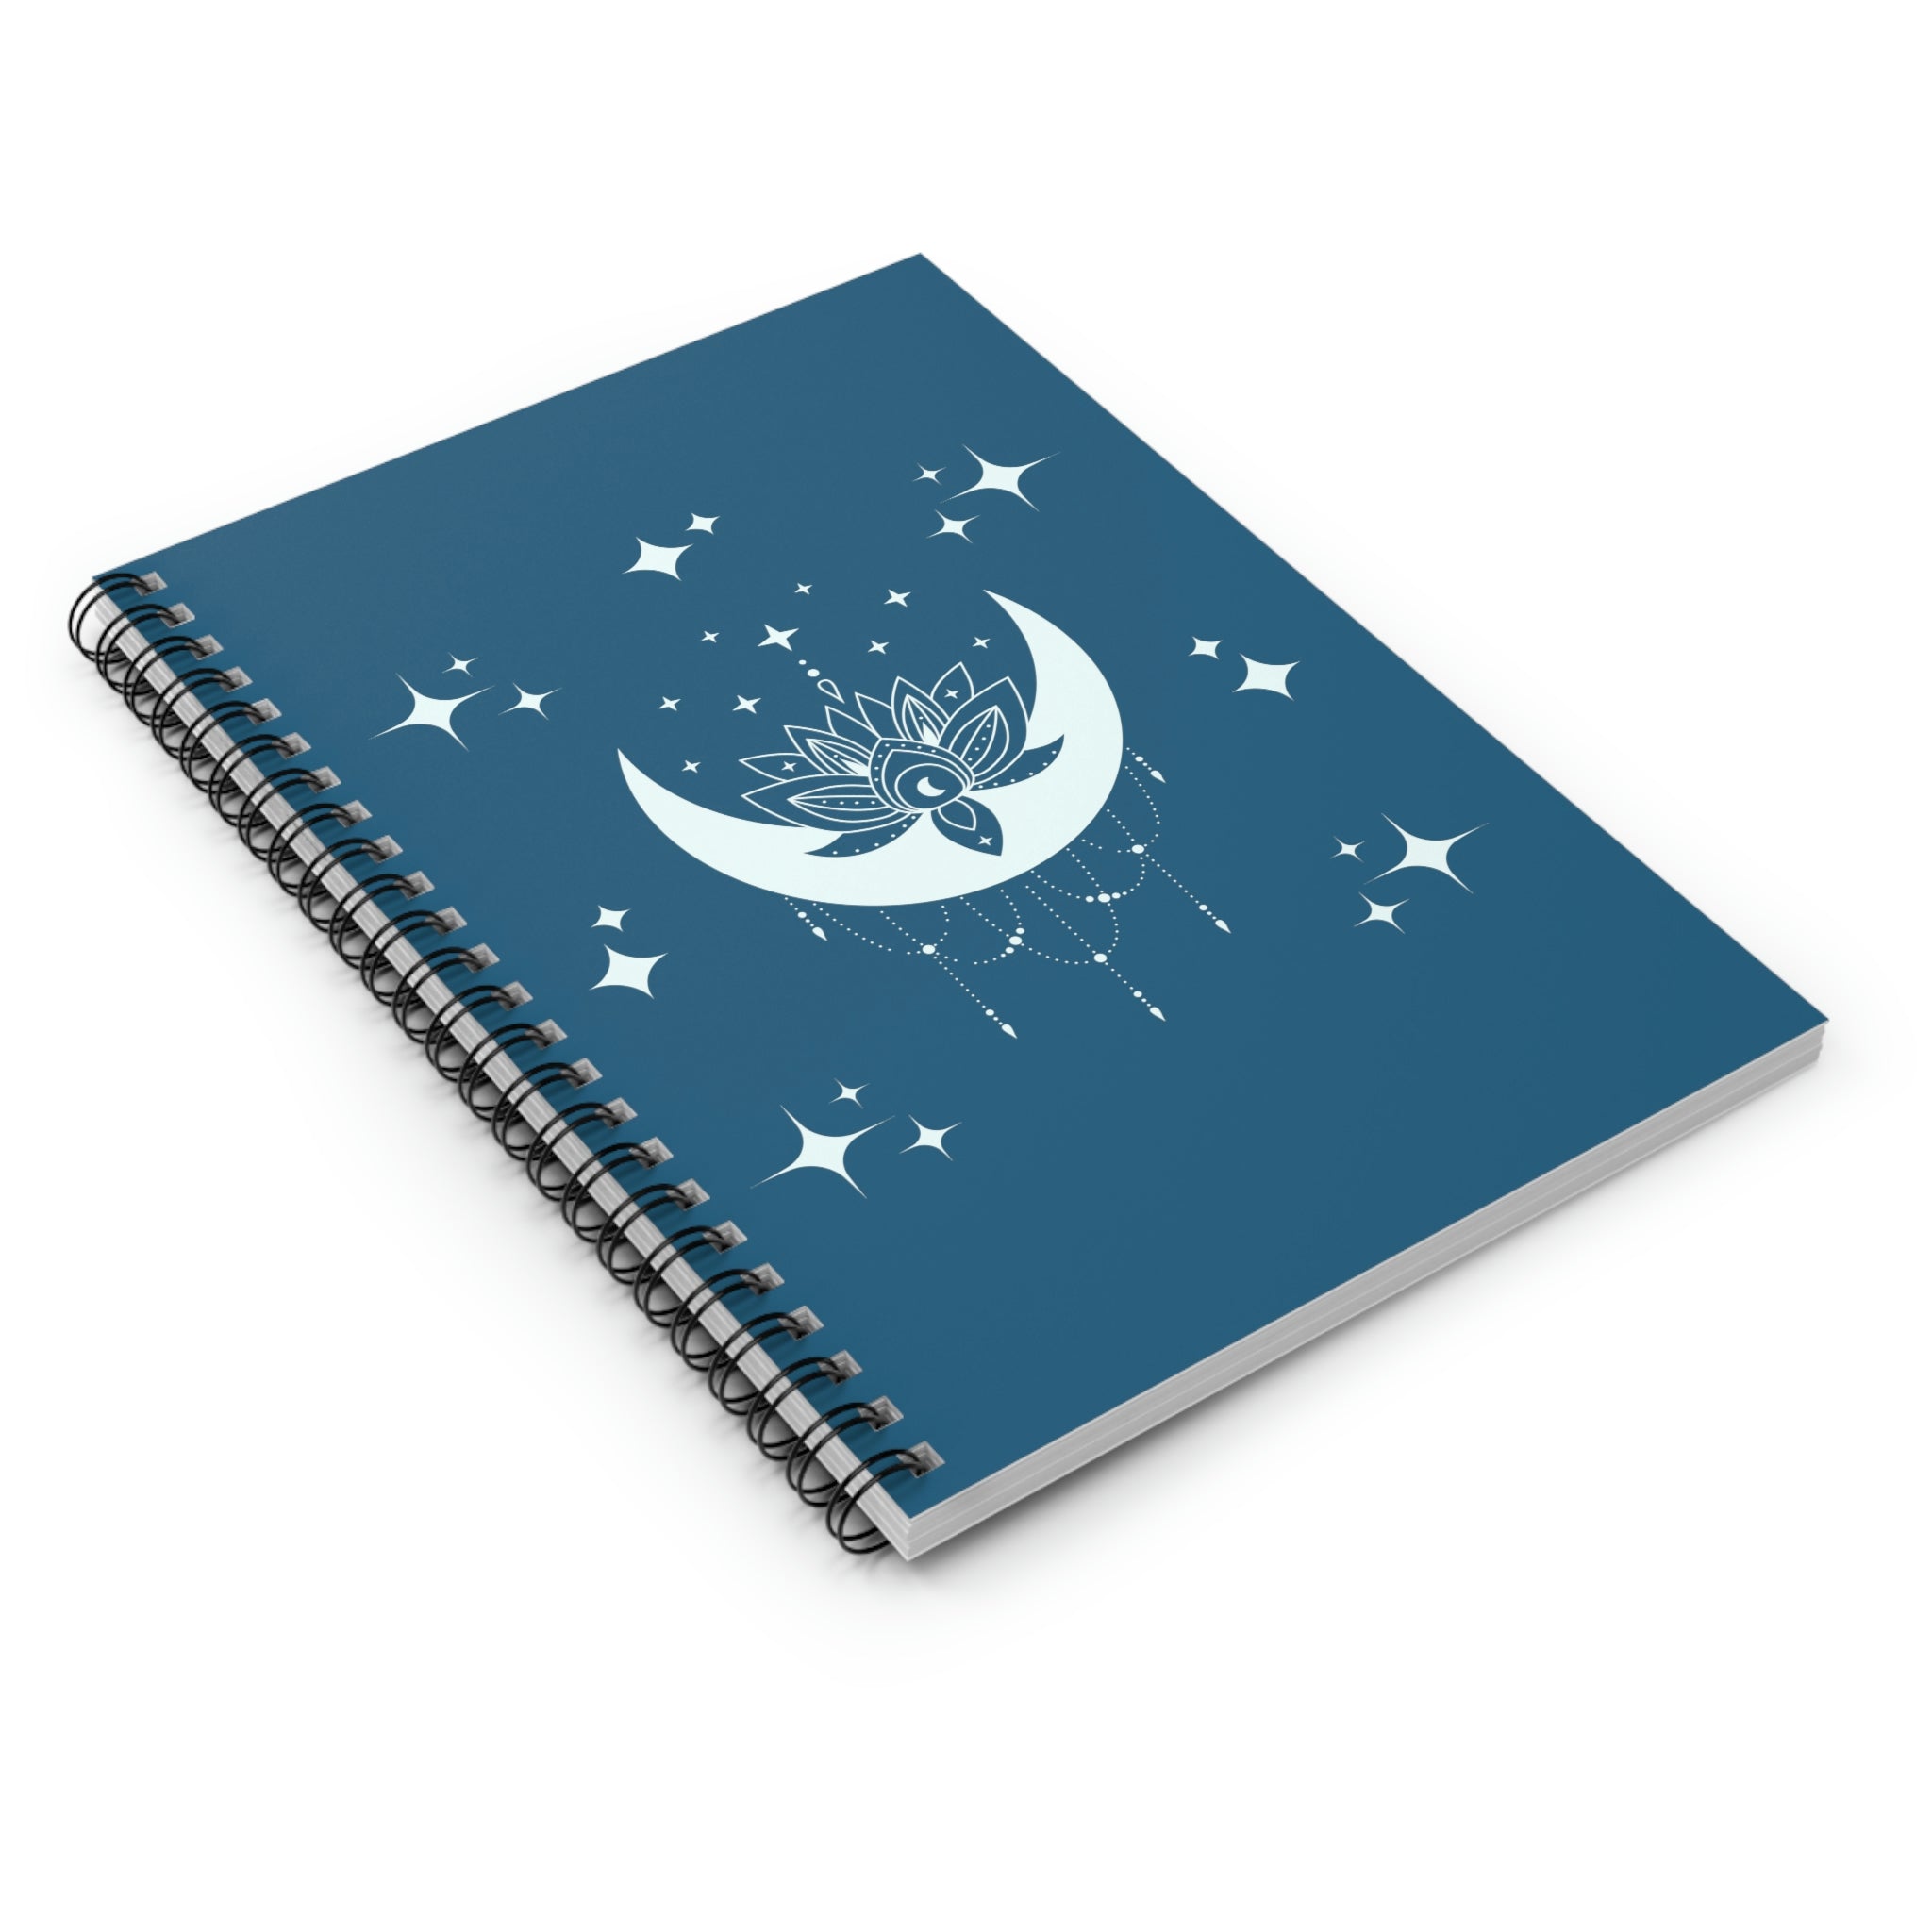 Starry Lotus Moon Notebook, Spiral Lined, 6” x 8”